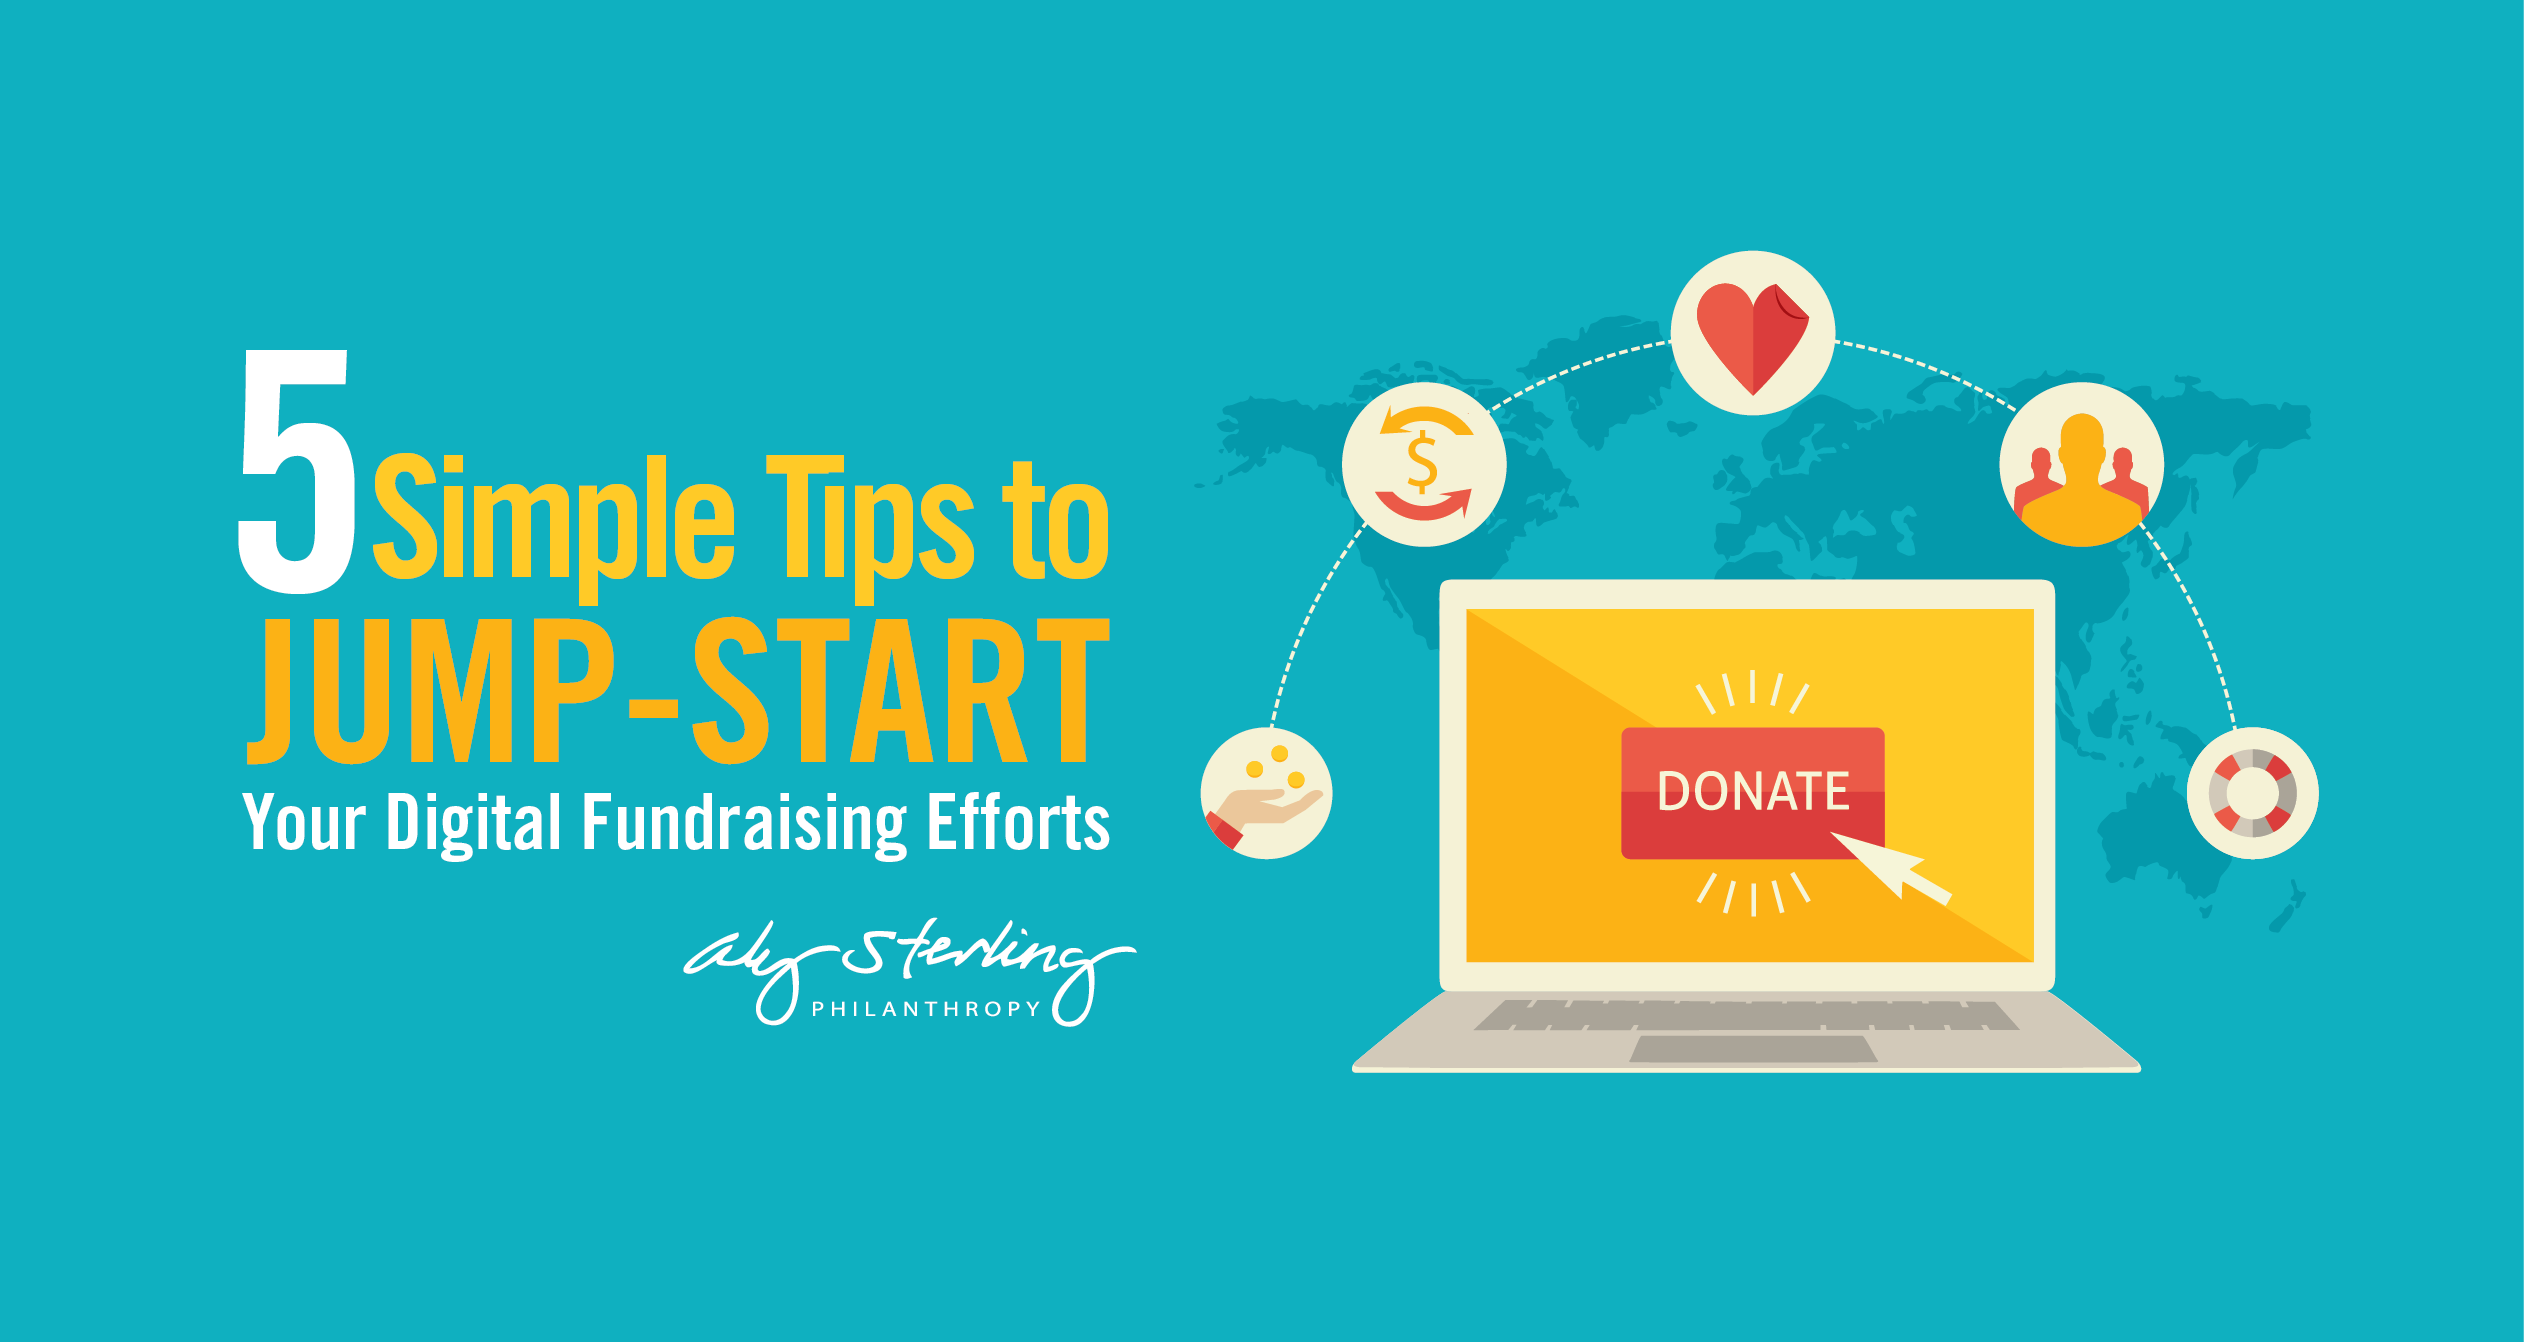 5 Simple Tips to Jump-Start Your Digital Fundraising Efforts